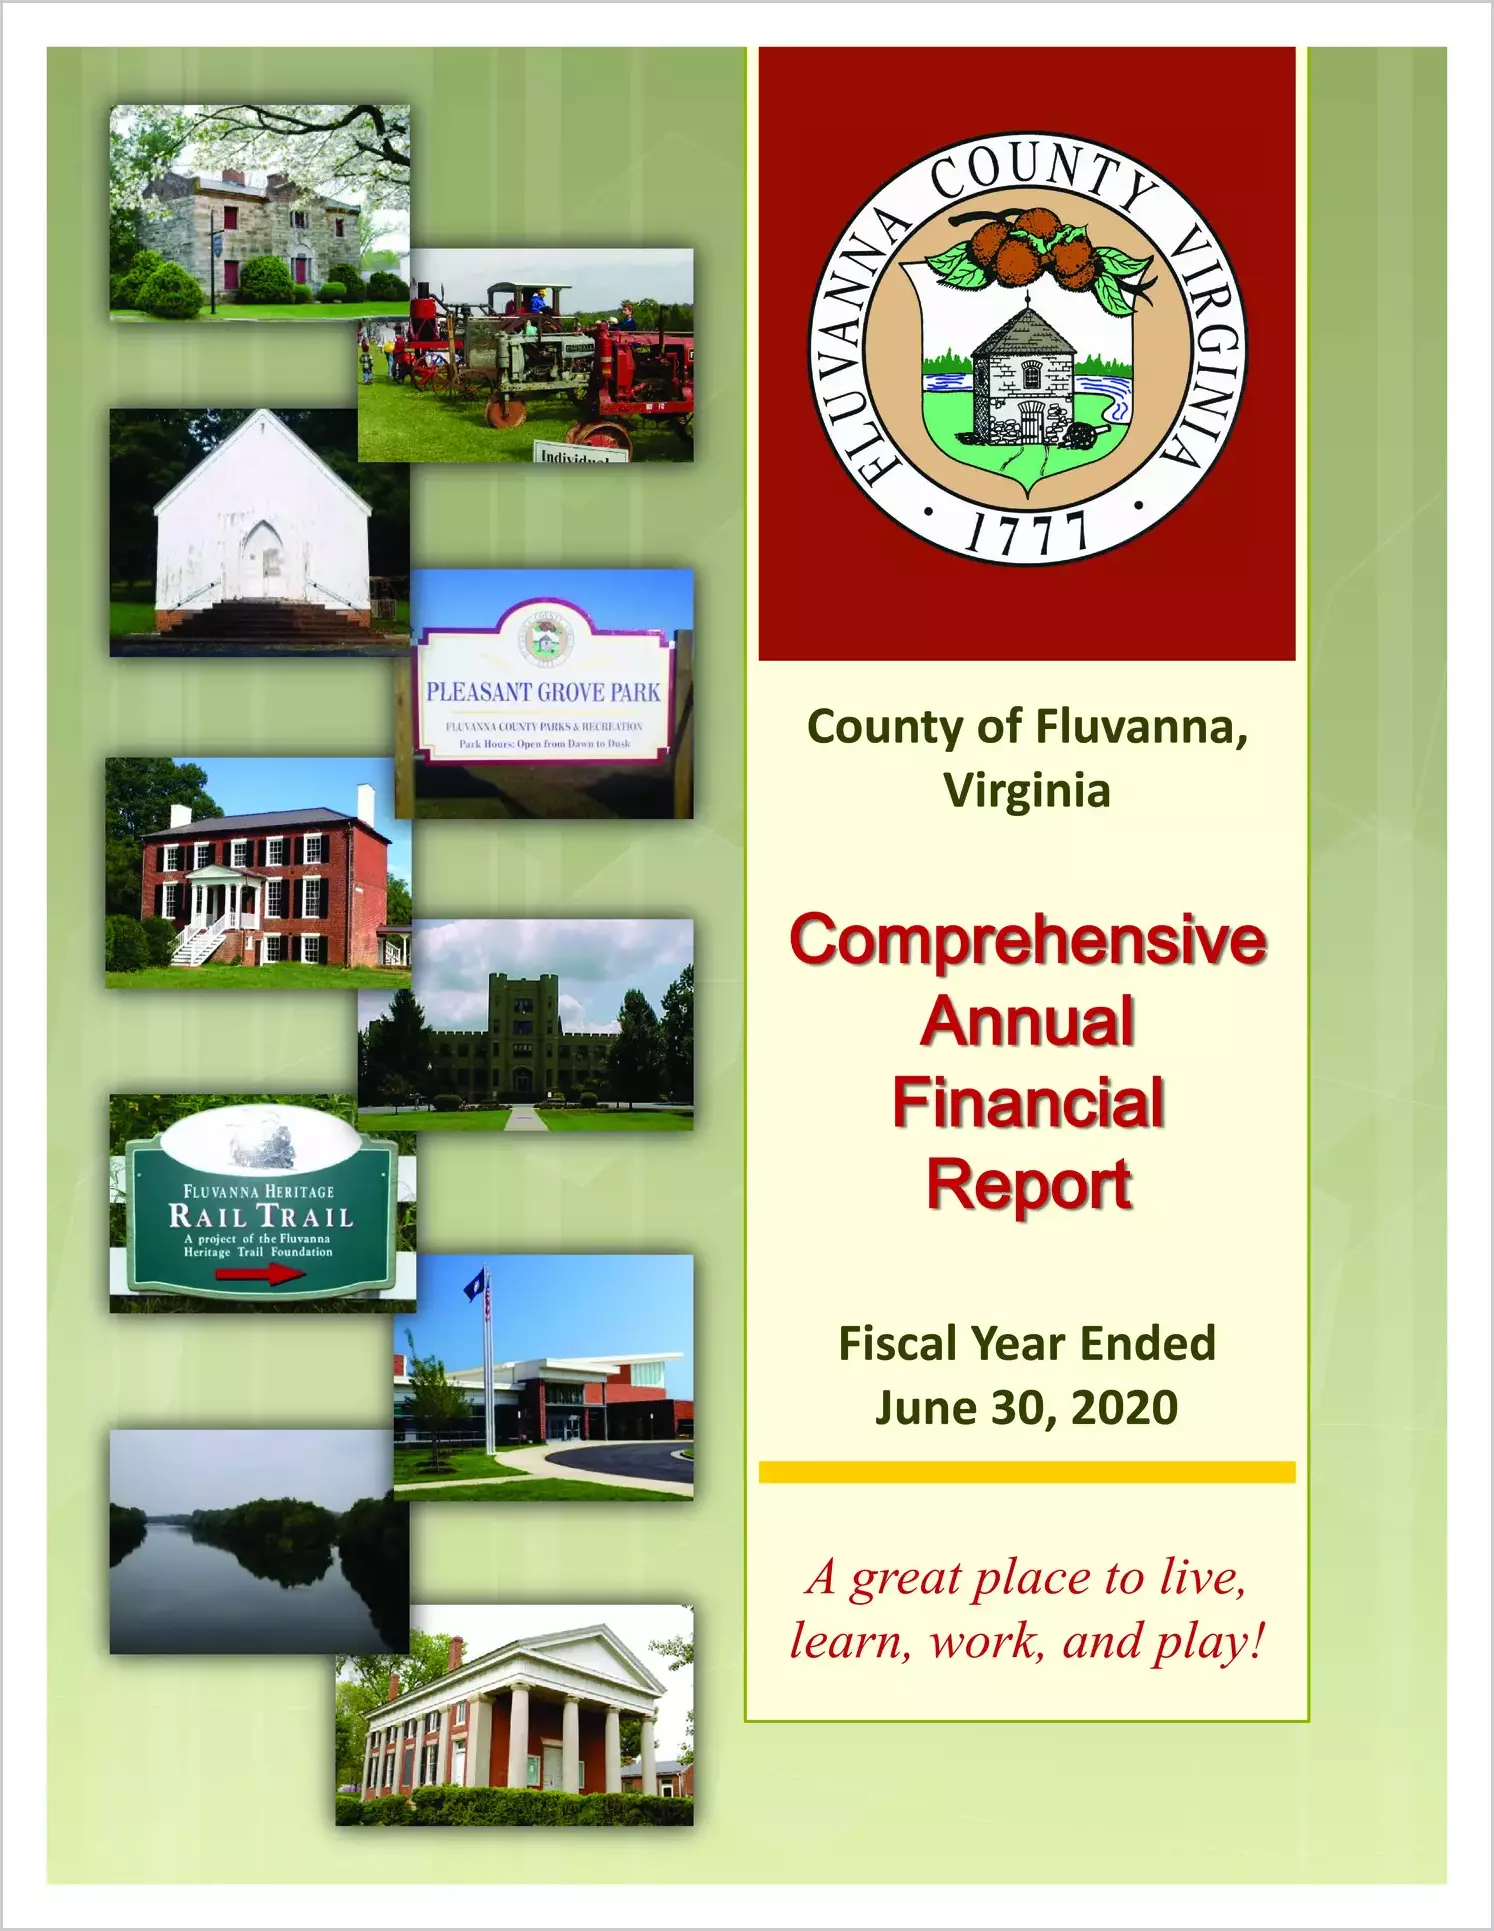 2020 Annual Financial Report for County of Fluvanna